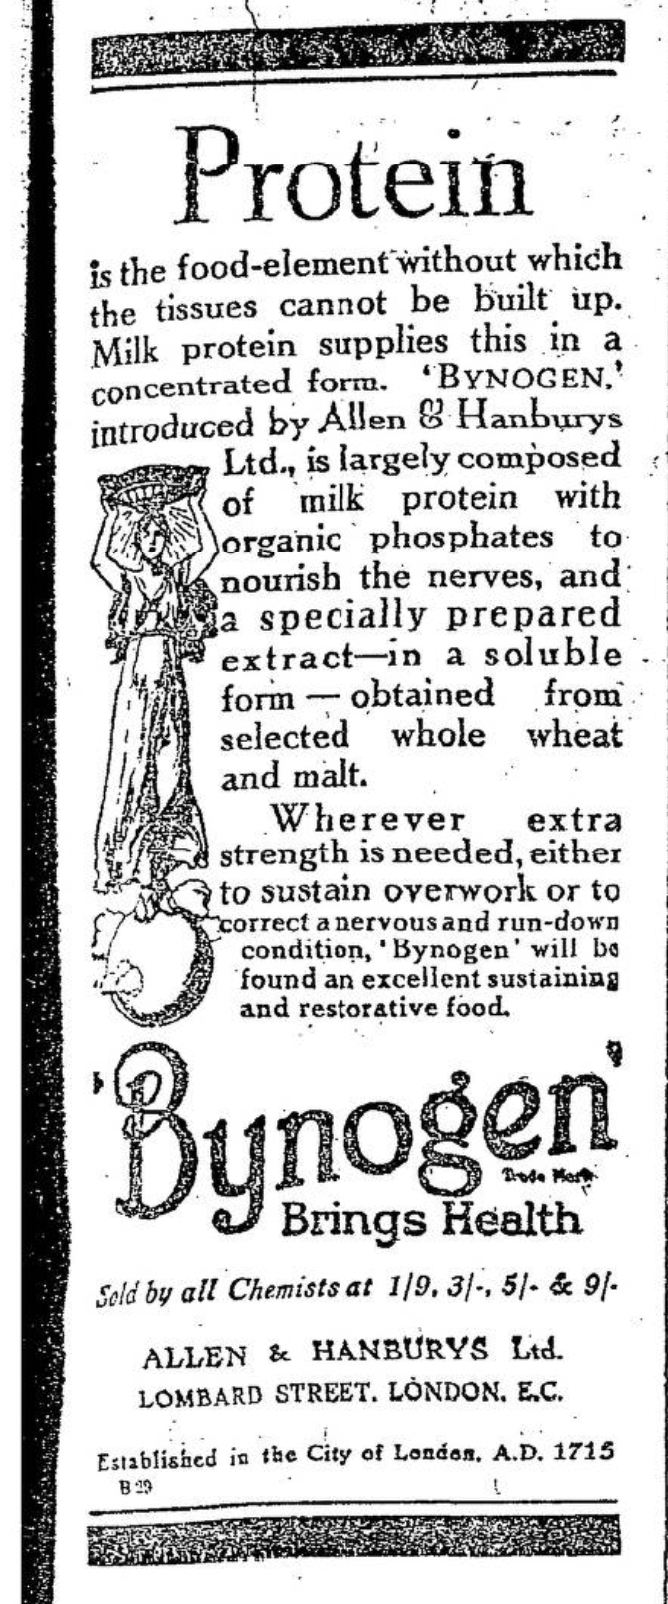 1917 advert for Bynogen a milk protein, phosphate, and whole wheat/malt extract supplement. The advertisers claim it is "an excellent sustaining and restorative food"